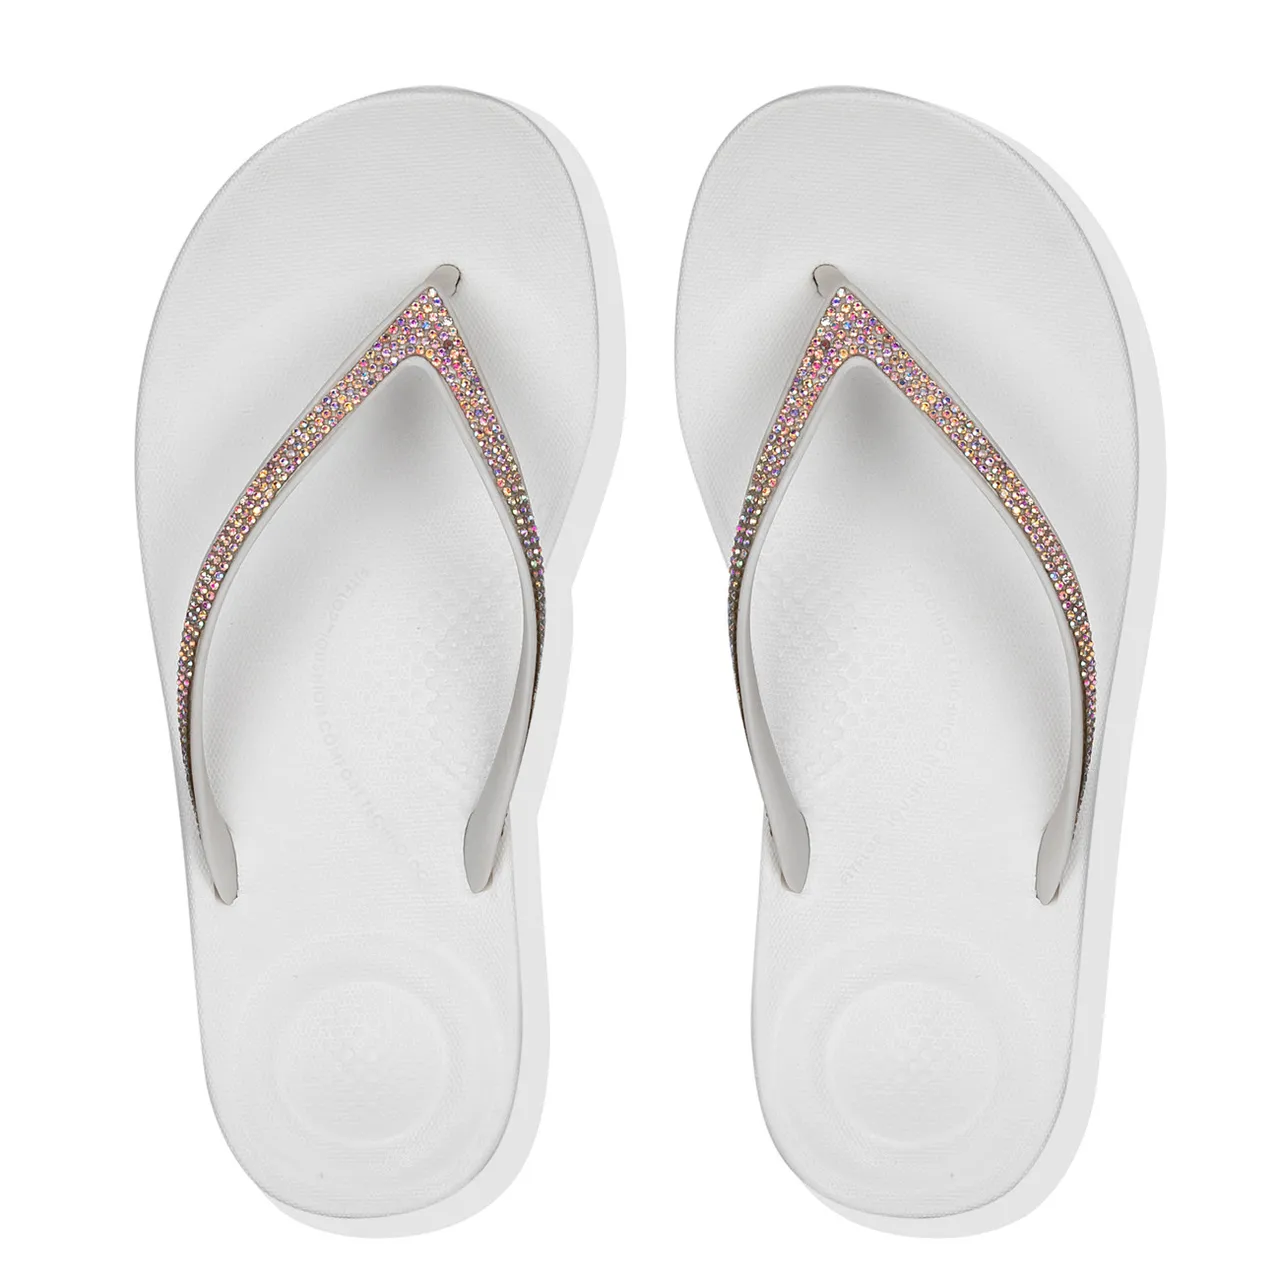 FitFlop Iqushion sparkle tpu